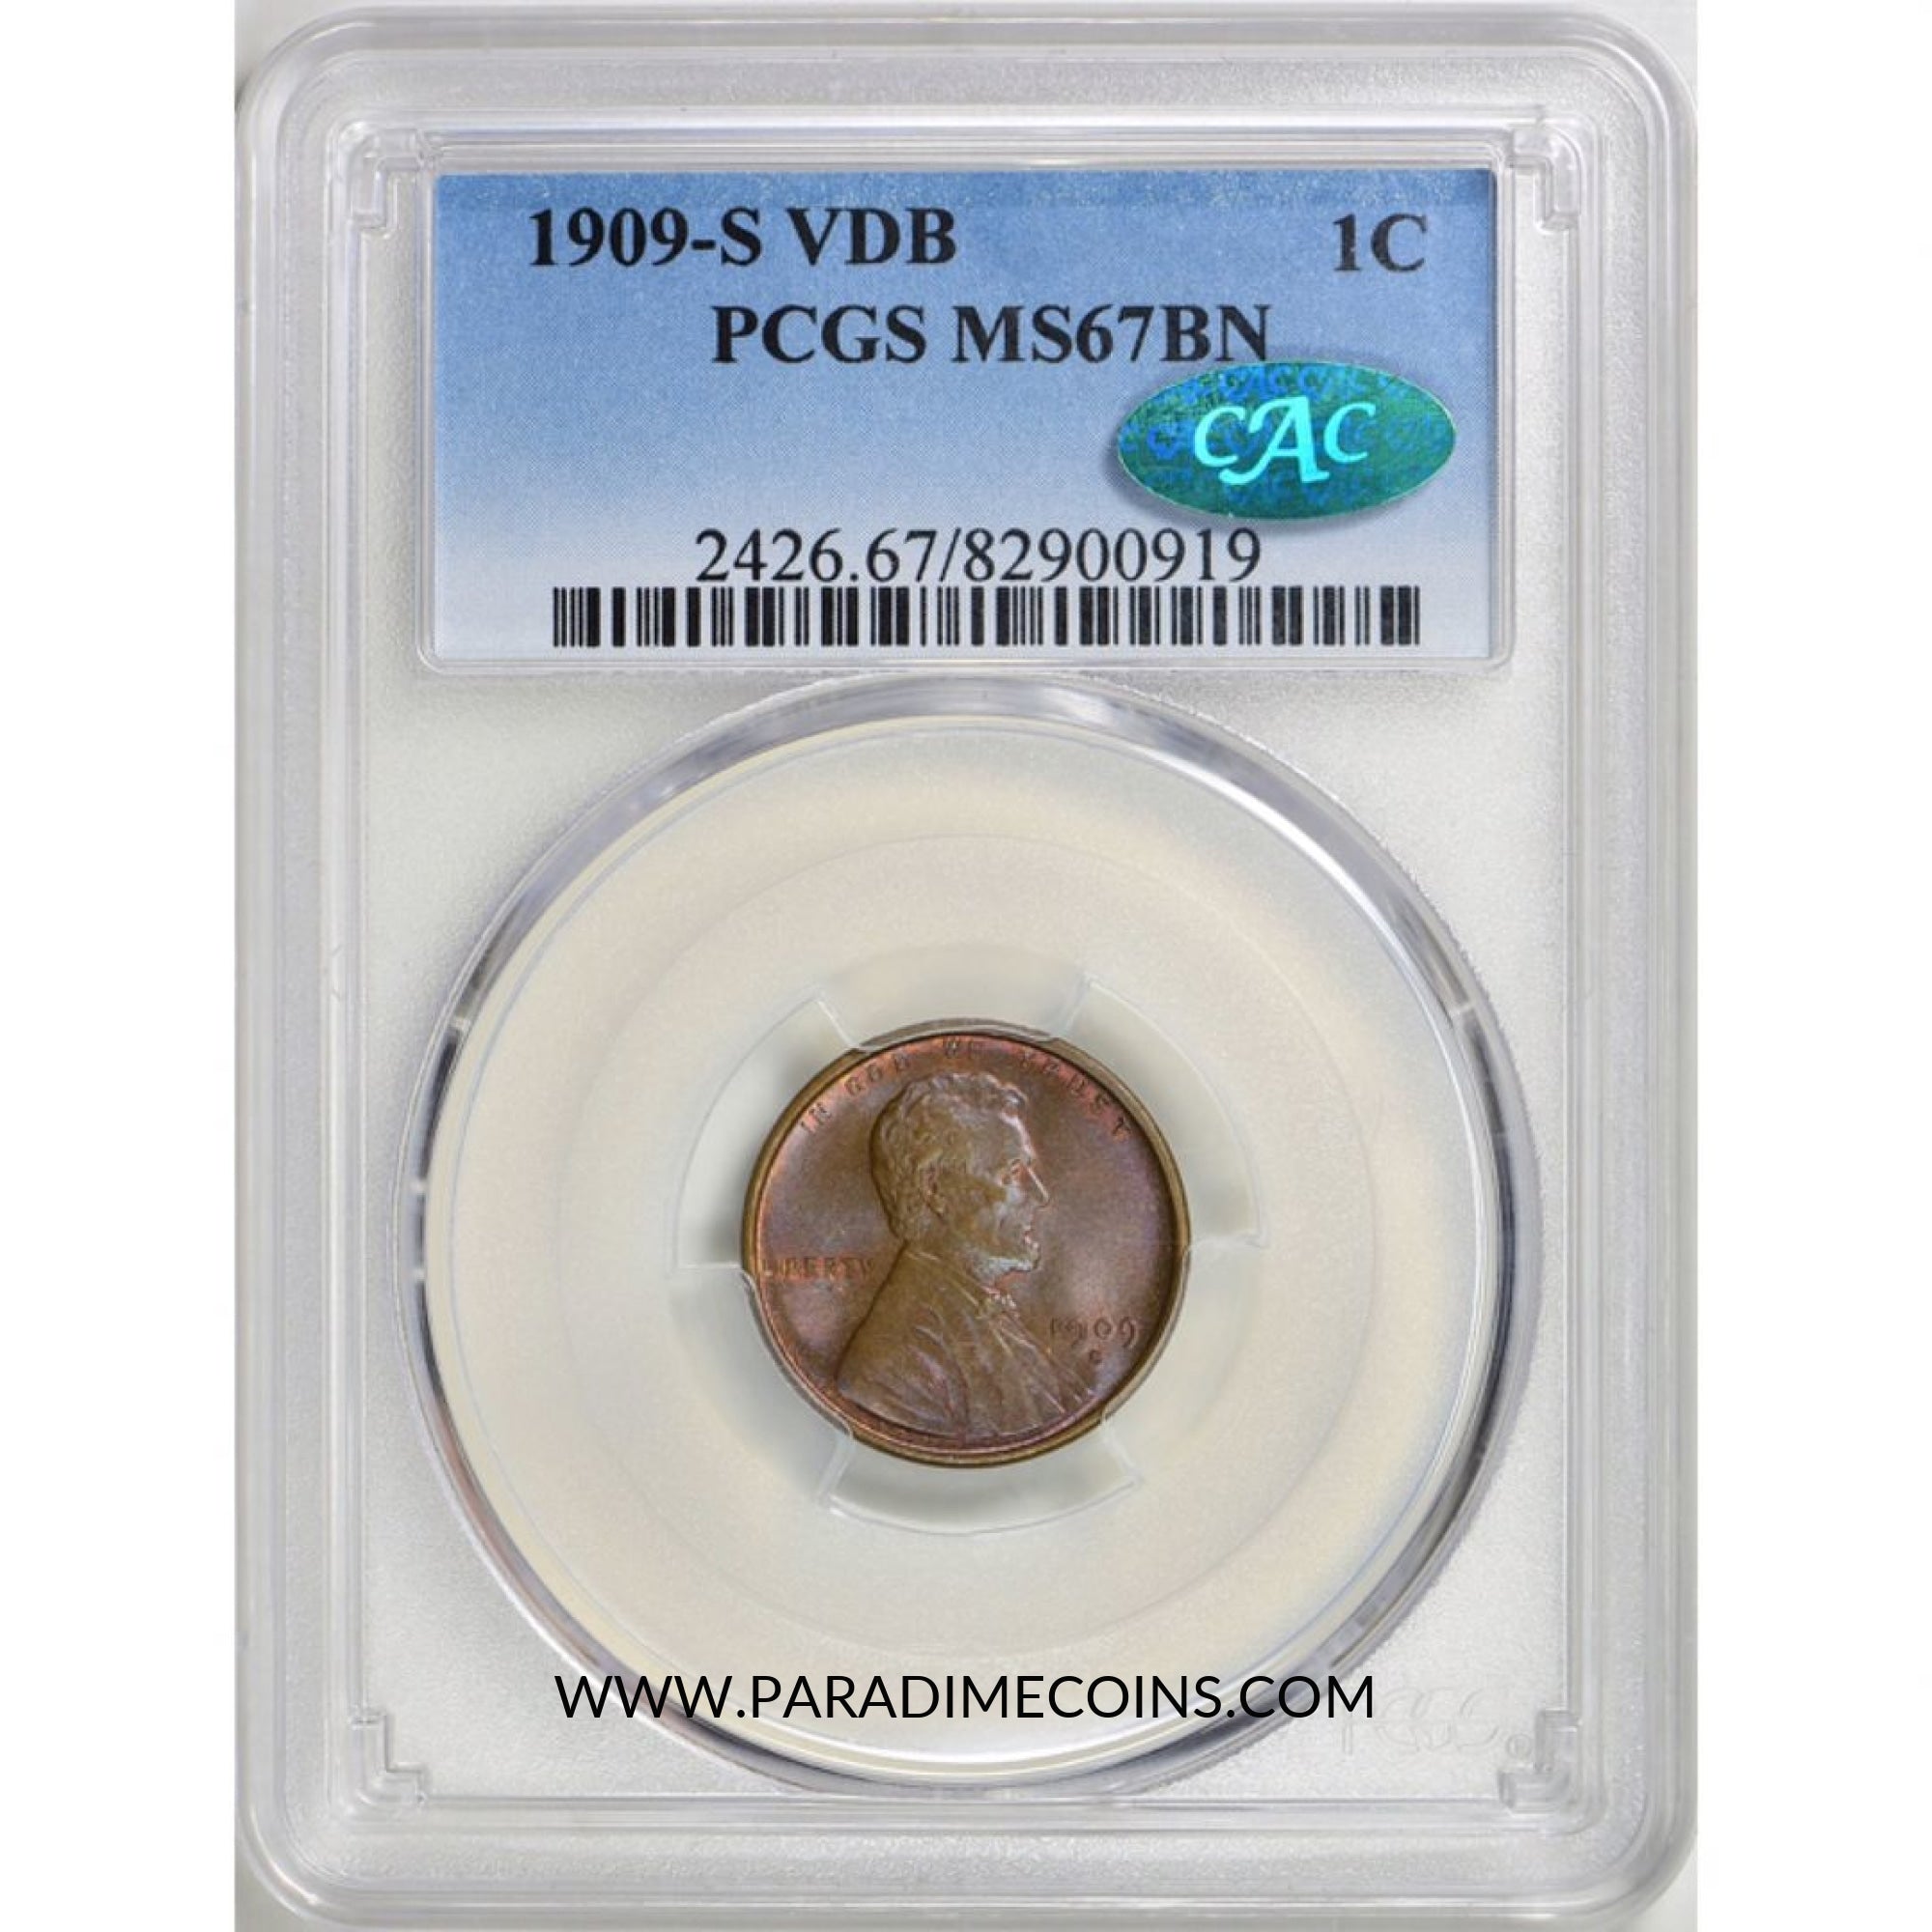 1909-S VDB 1C MS67BN PCGS CAC - Paradime Coins | PCGS NGC CACG CAC Rare US Numismatic Coins For Sale